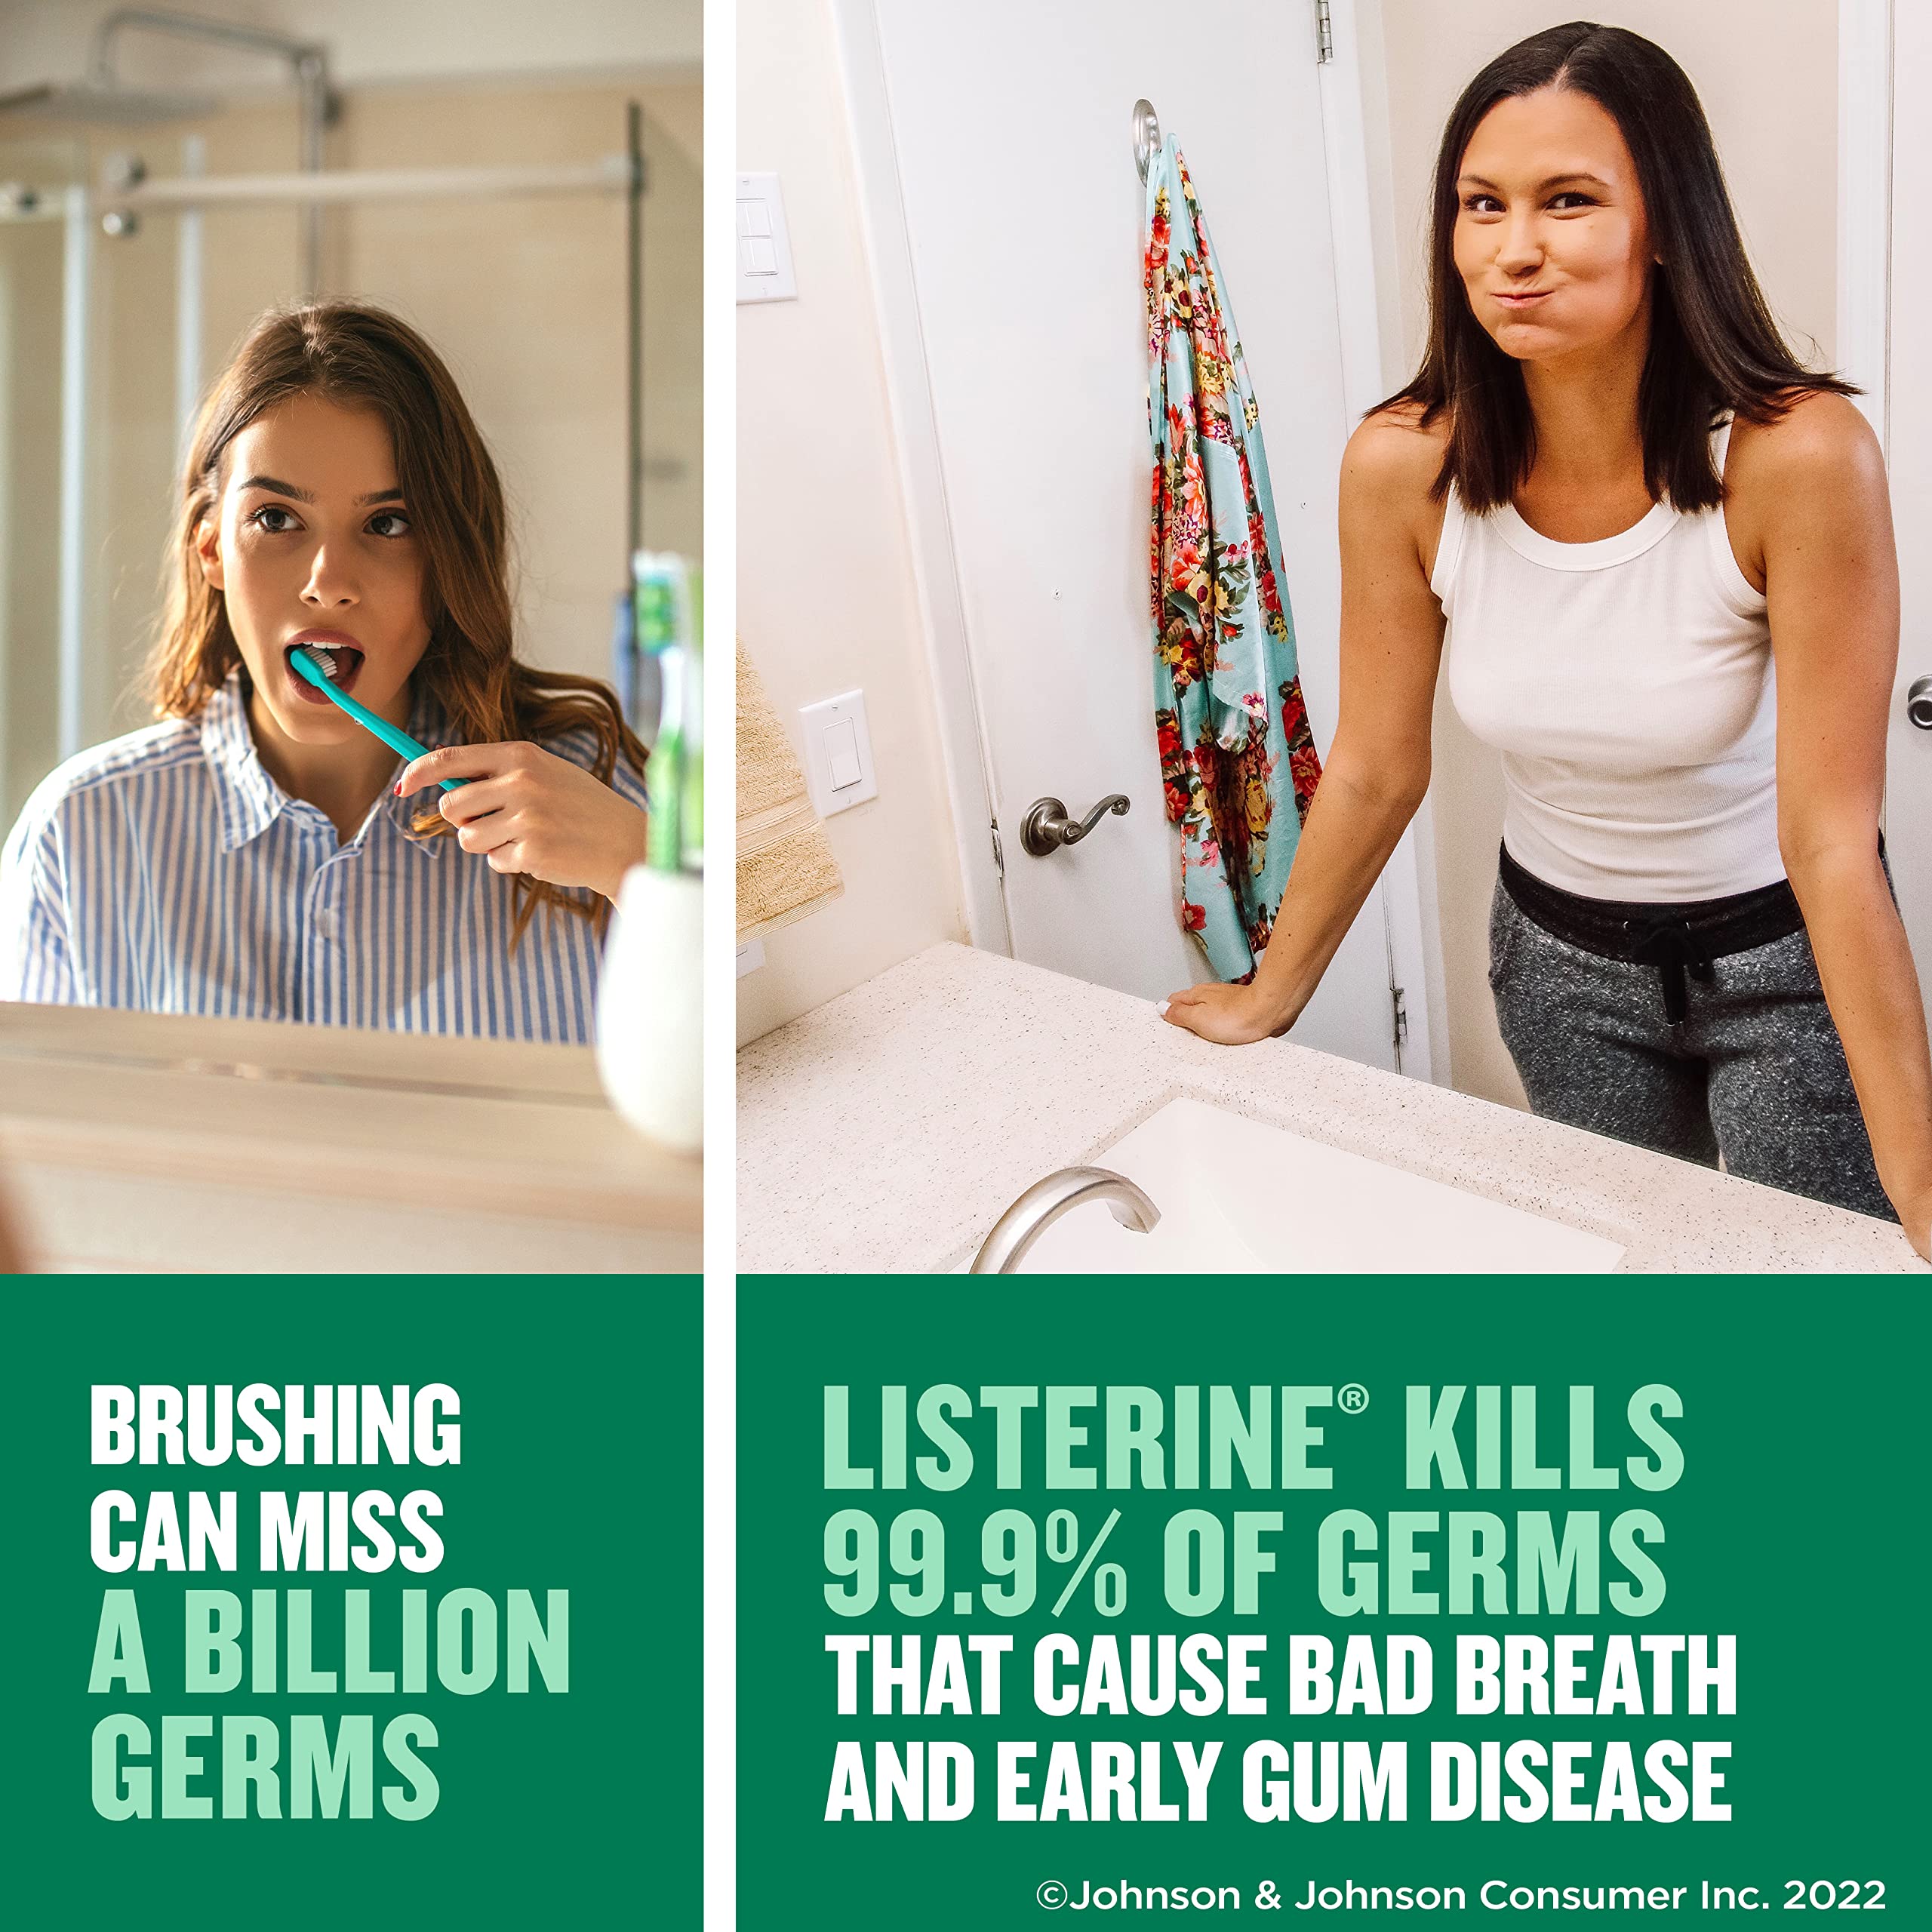 Listerine Freshburst Antiseptic Mouthwash for Bad Breath, Kills 99% of Germs That Cause Bad Breath & Fight Plaque & Gingivitis, ADA Accepted Mouthwash, Spearmint, 8.5 Fl. Oz (250 mL)